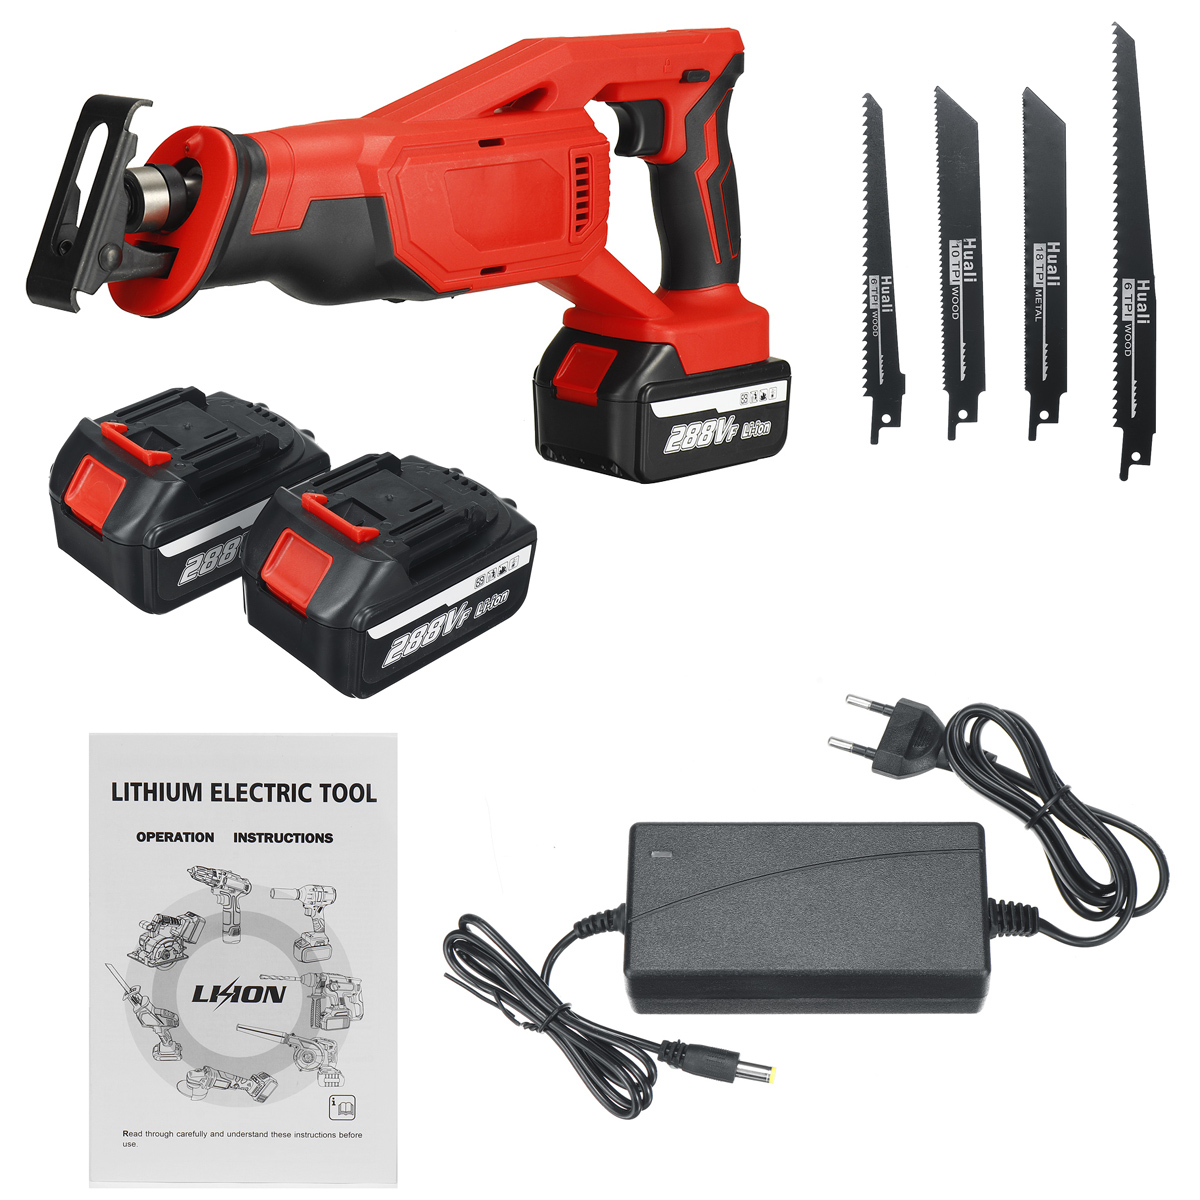 288VF-Cordless-Reciprocating-Saw-Rechargeable-Electric-Recip-Sabre-Saw-W-4pcs-Blade--2pcs-Battery-Wo-1868930-12